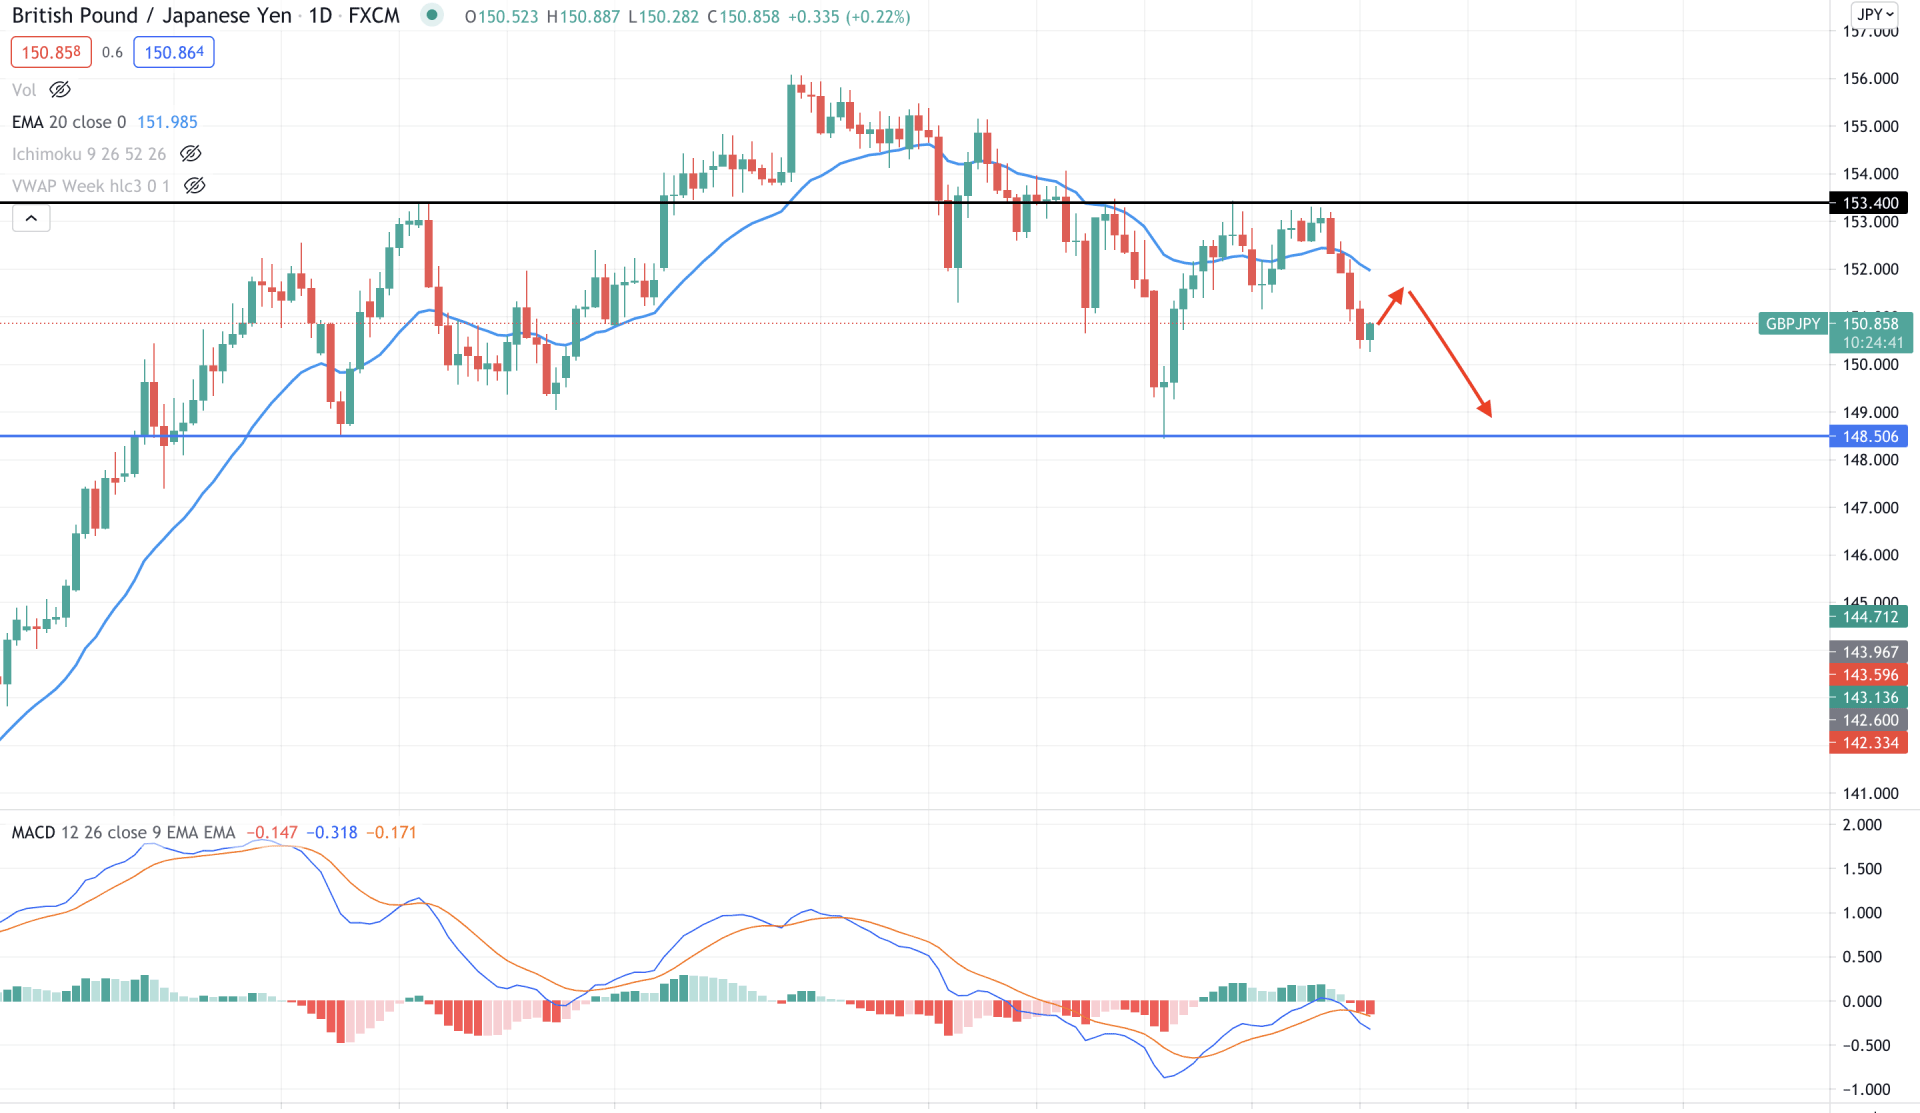 GBPJPY Daily Technical Analysis 18 August 2021